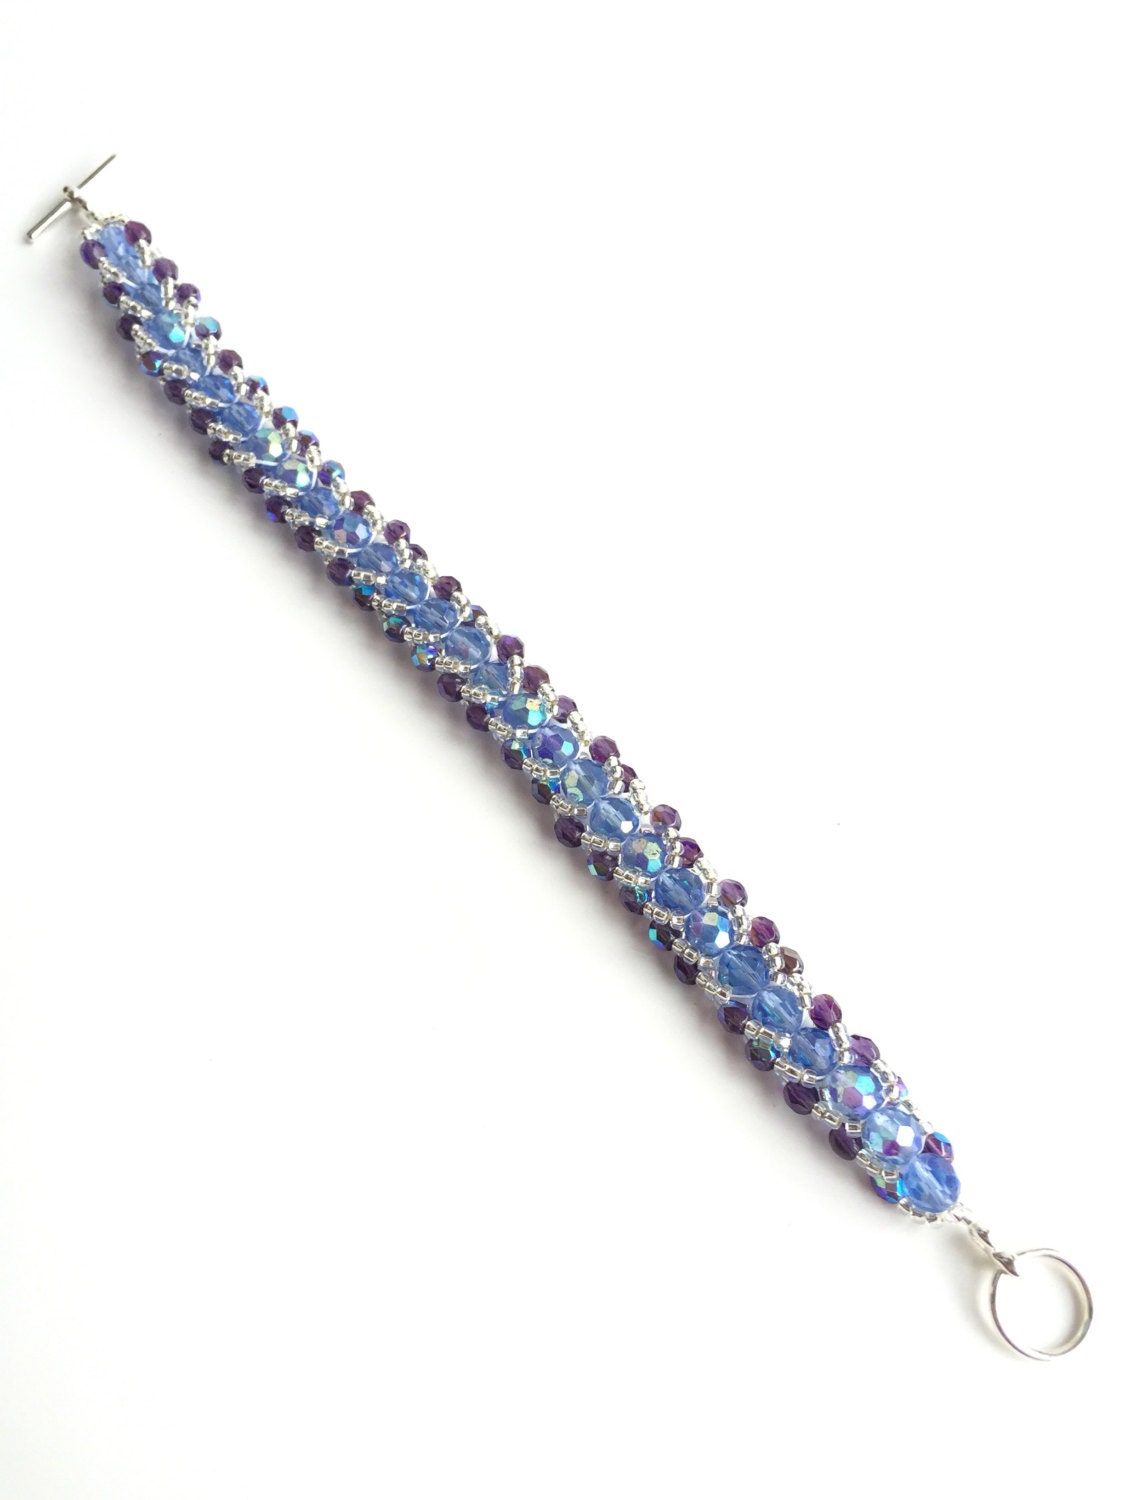 Iridescent Blue Glass Faceted and Seed Beads Bracelet - Etsy